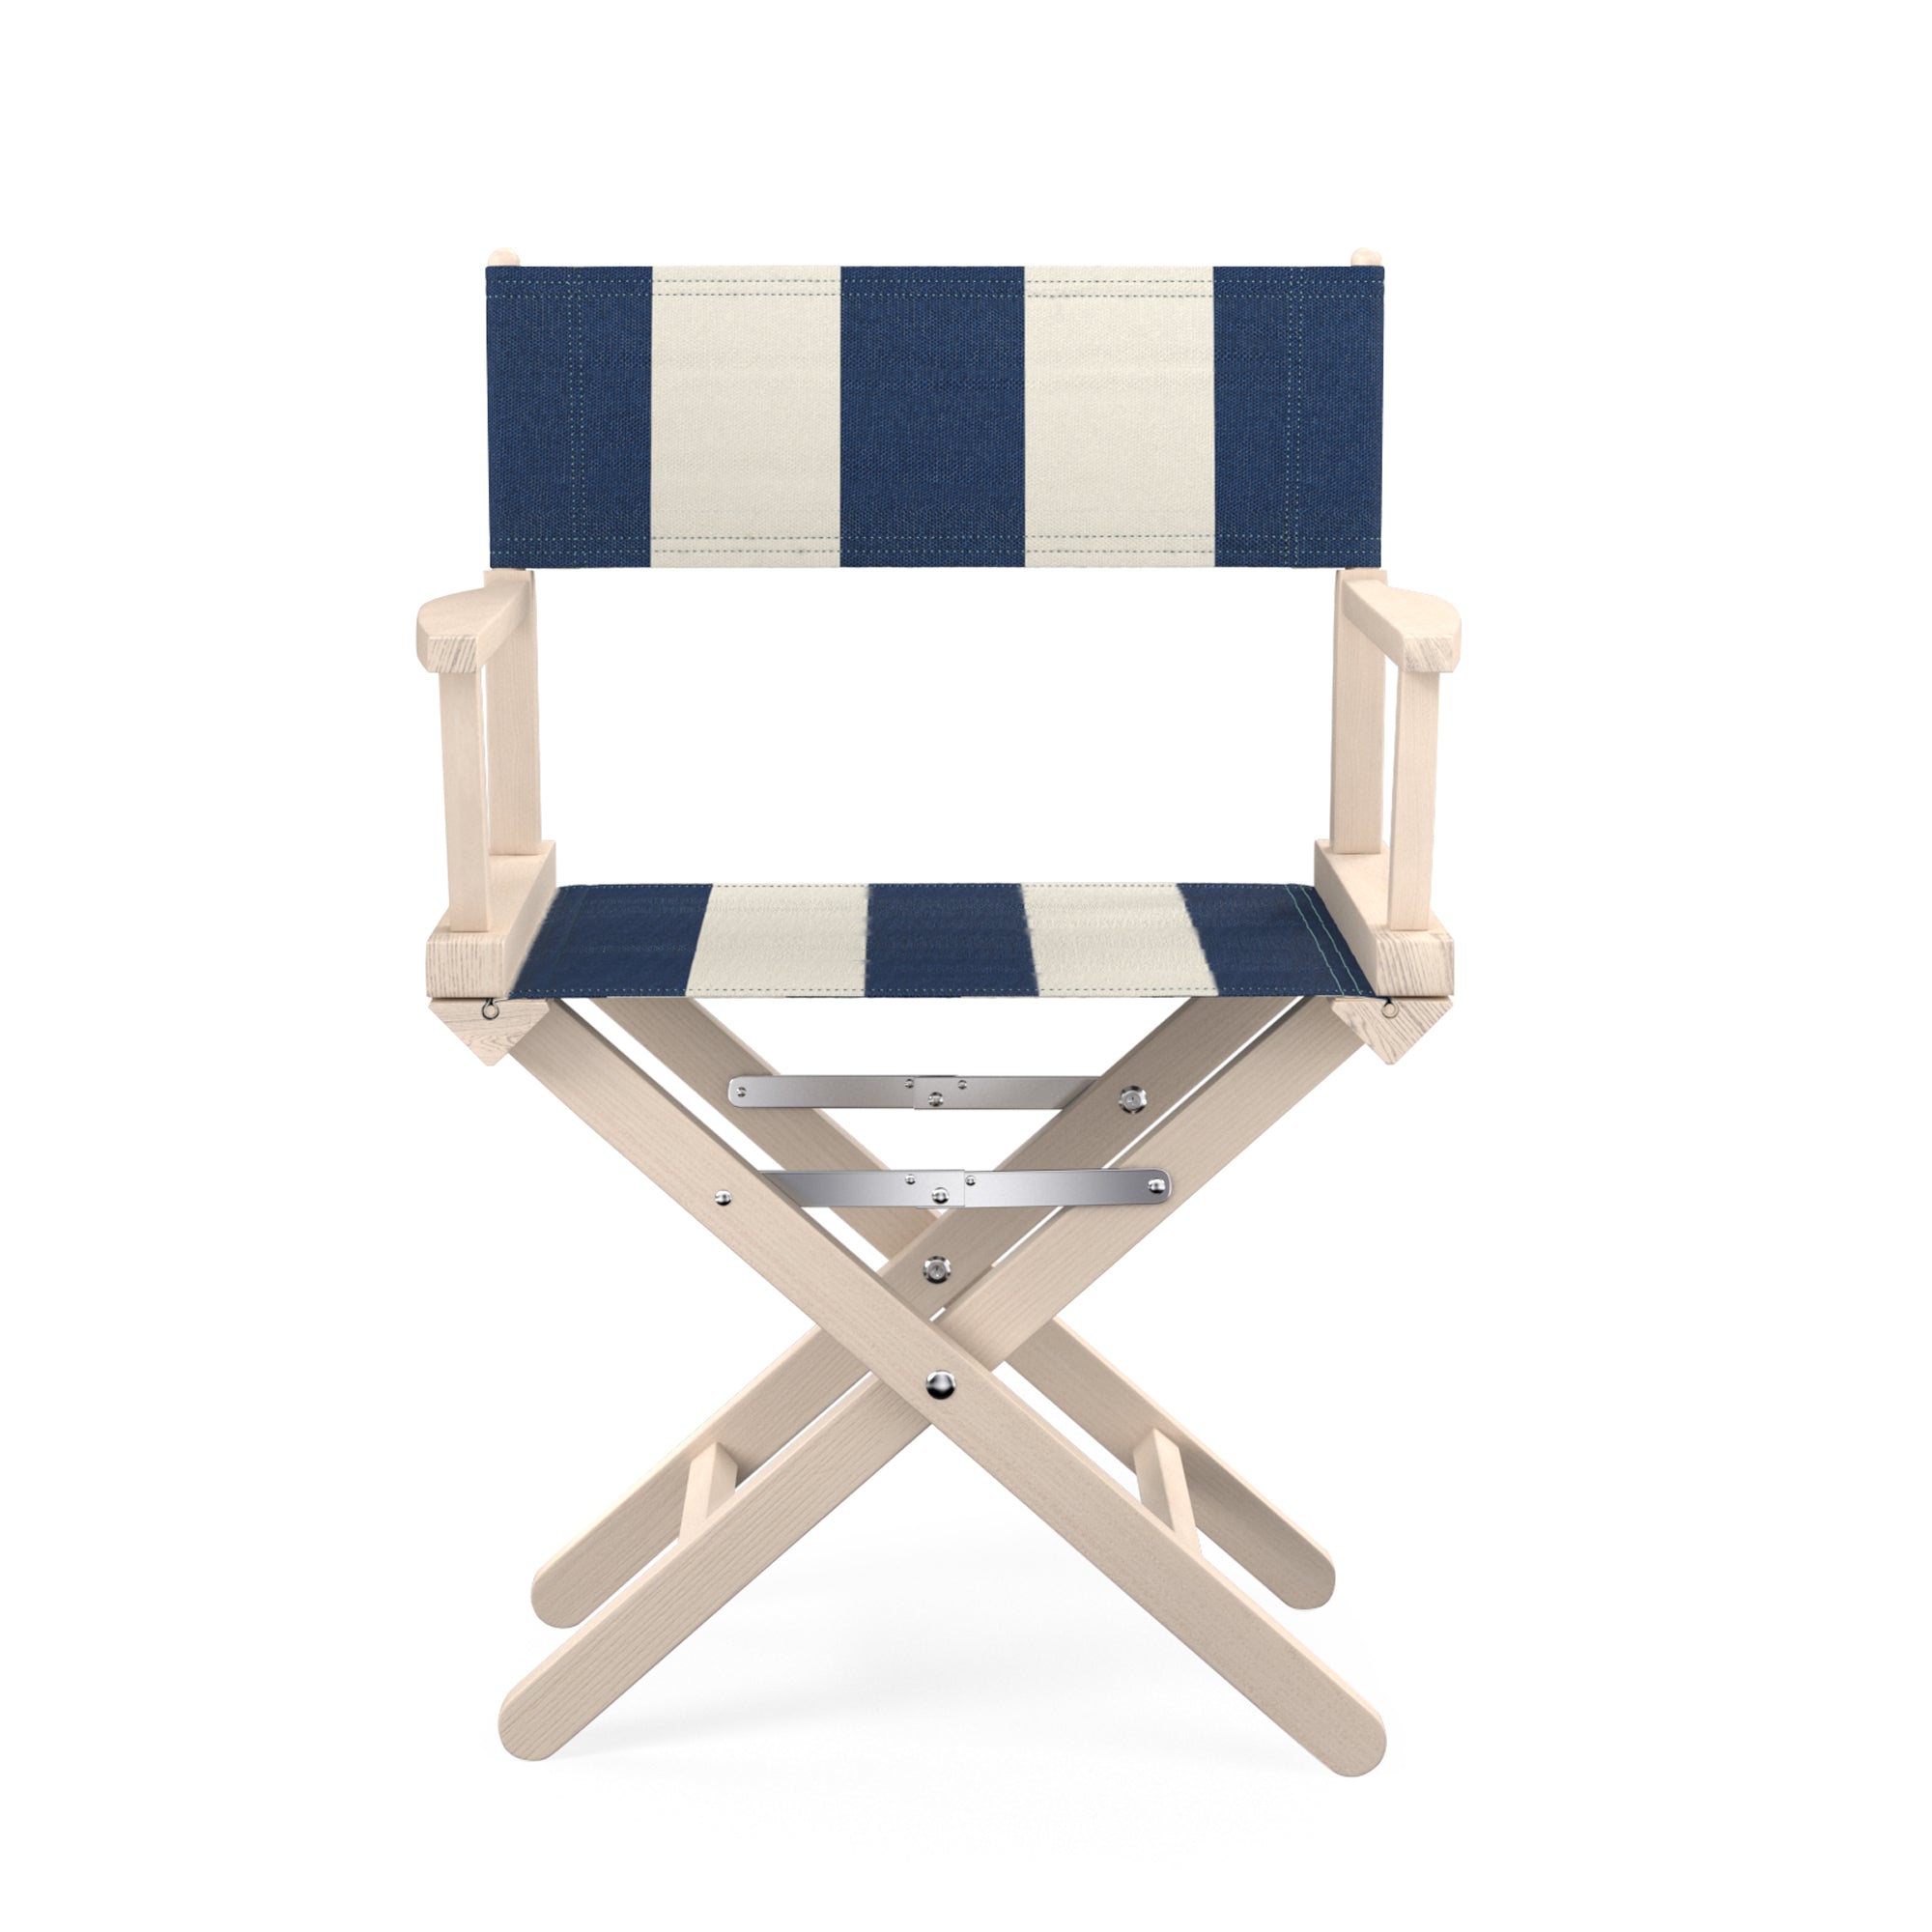 Director's%20Chair%20in%20Navy%20Bold%20Stripe%20&%20White%20Stained%20Beech image 1